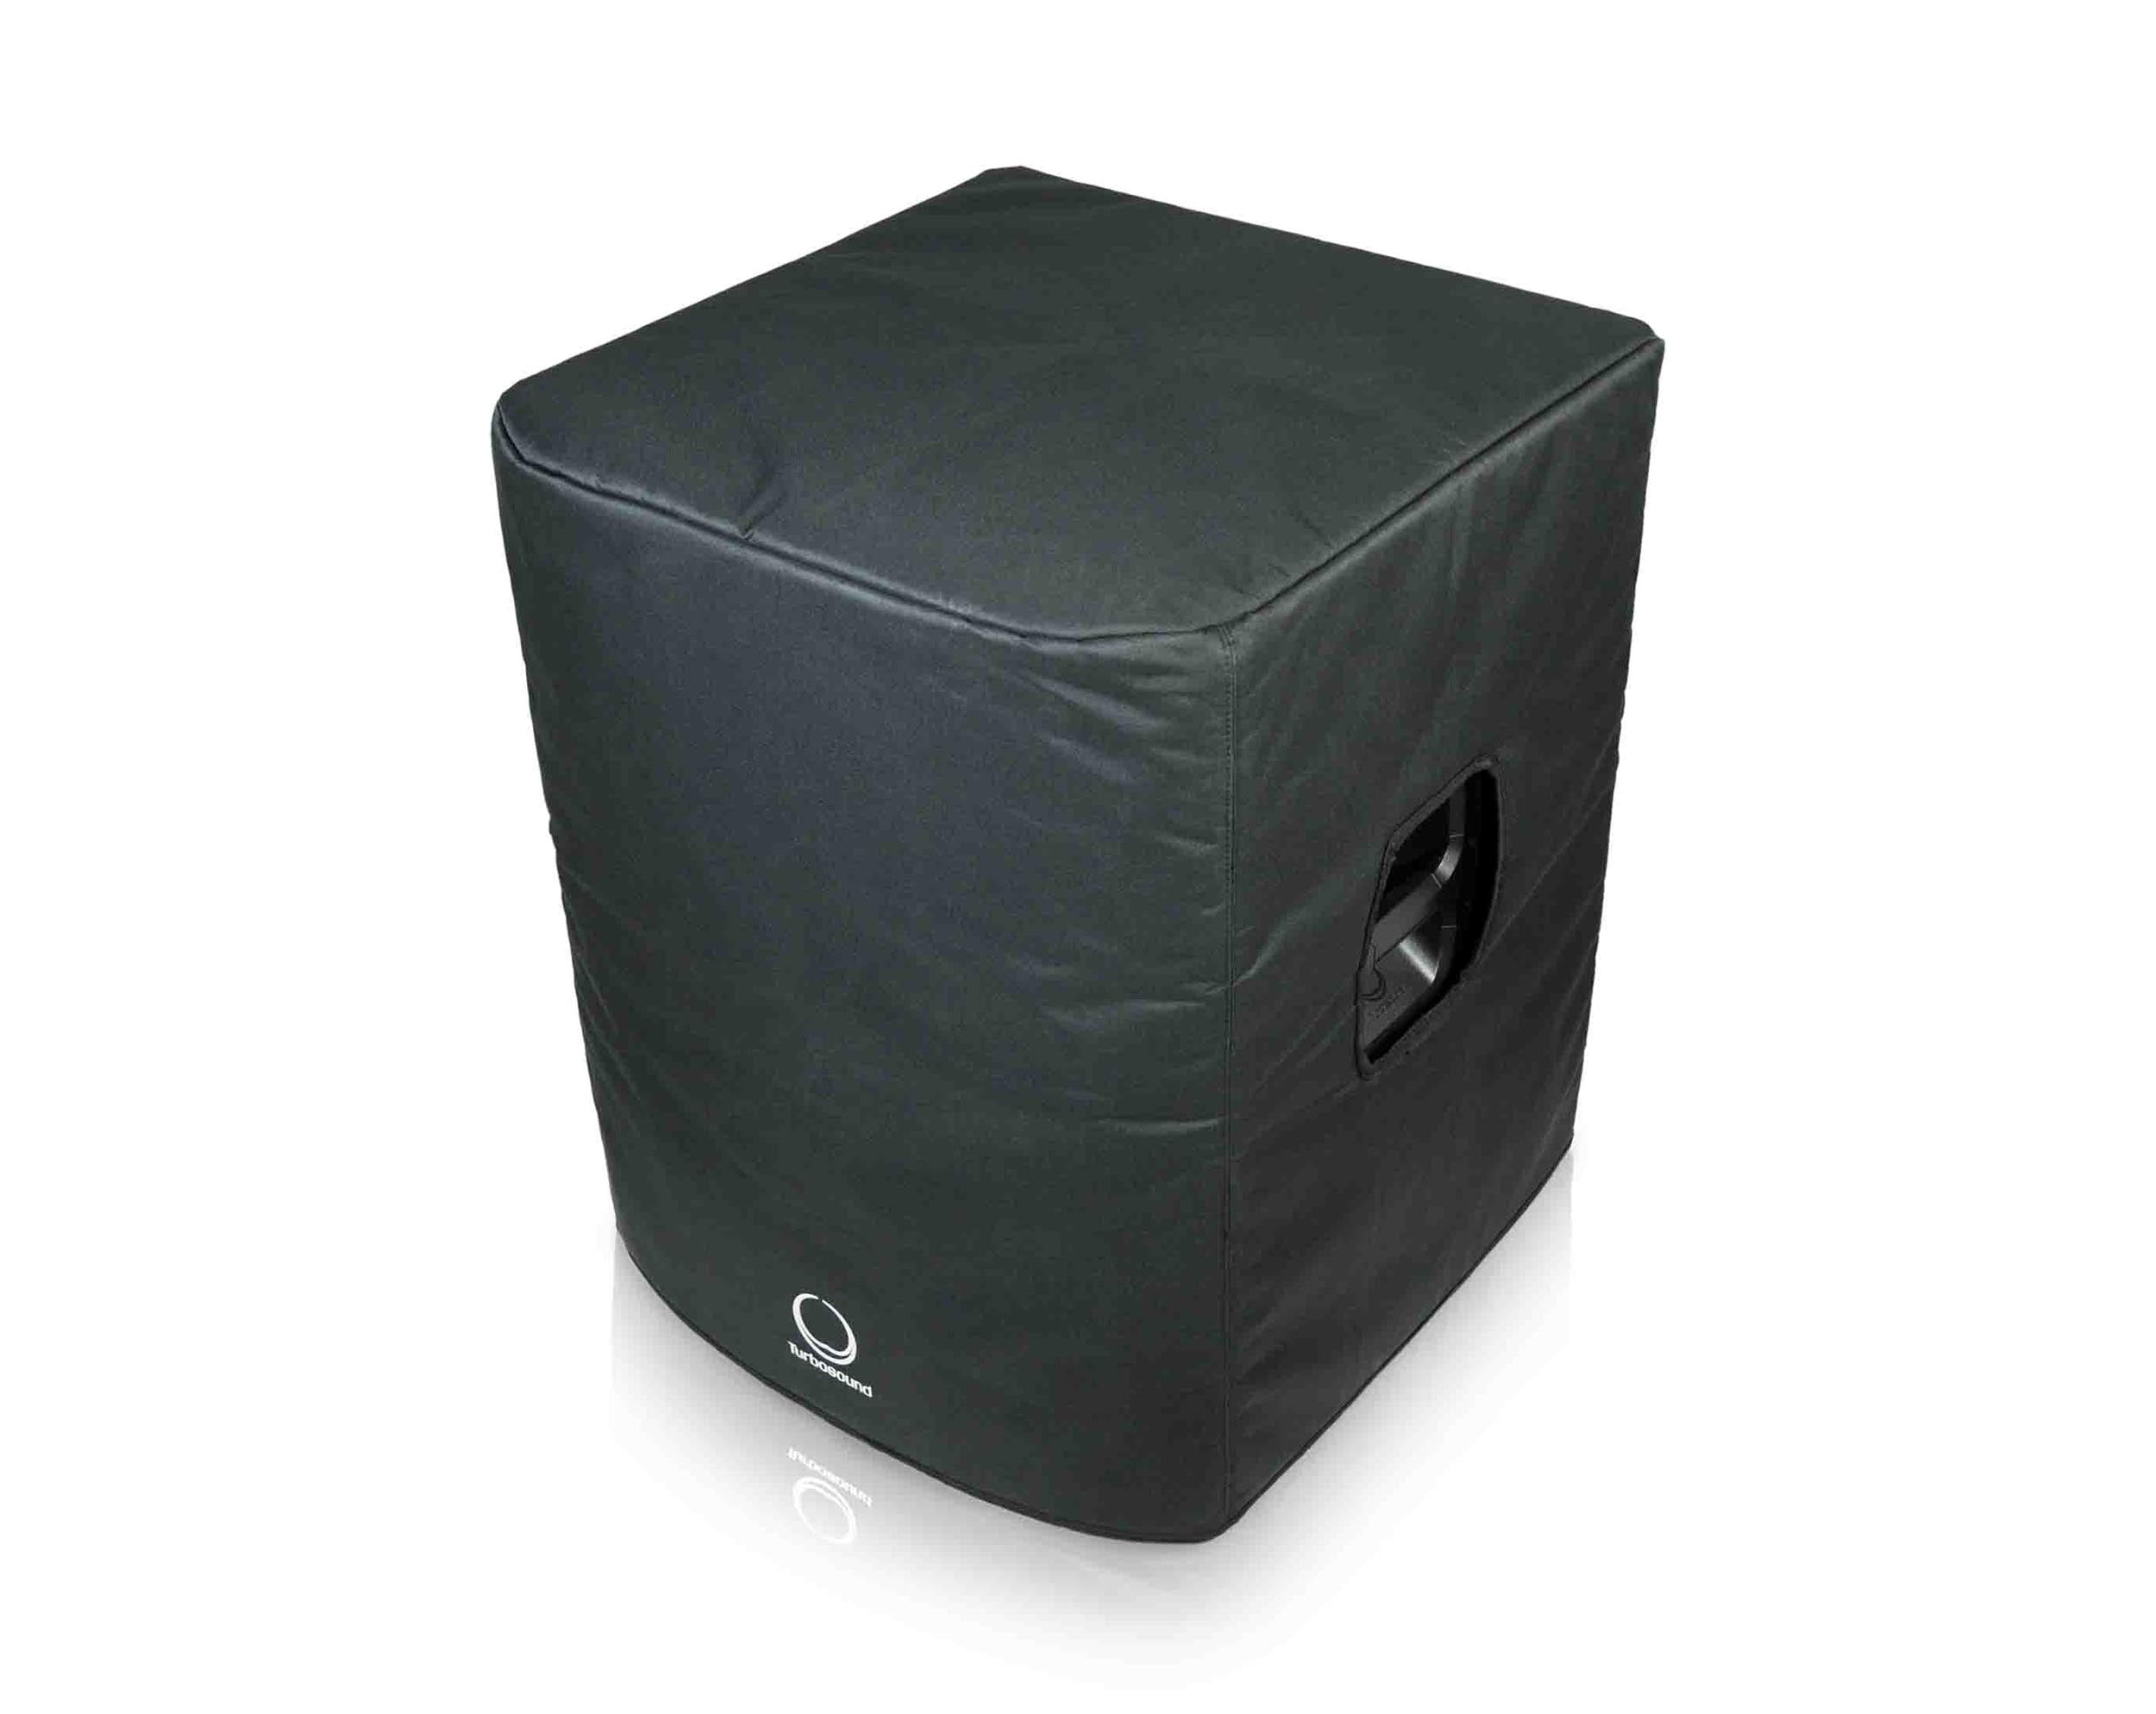 Turbosound TS-PC18B-1, Deluxe Water Resistant Protective Cover for 18" Subwoofers by Turbosound